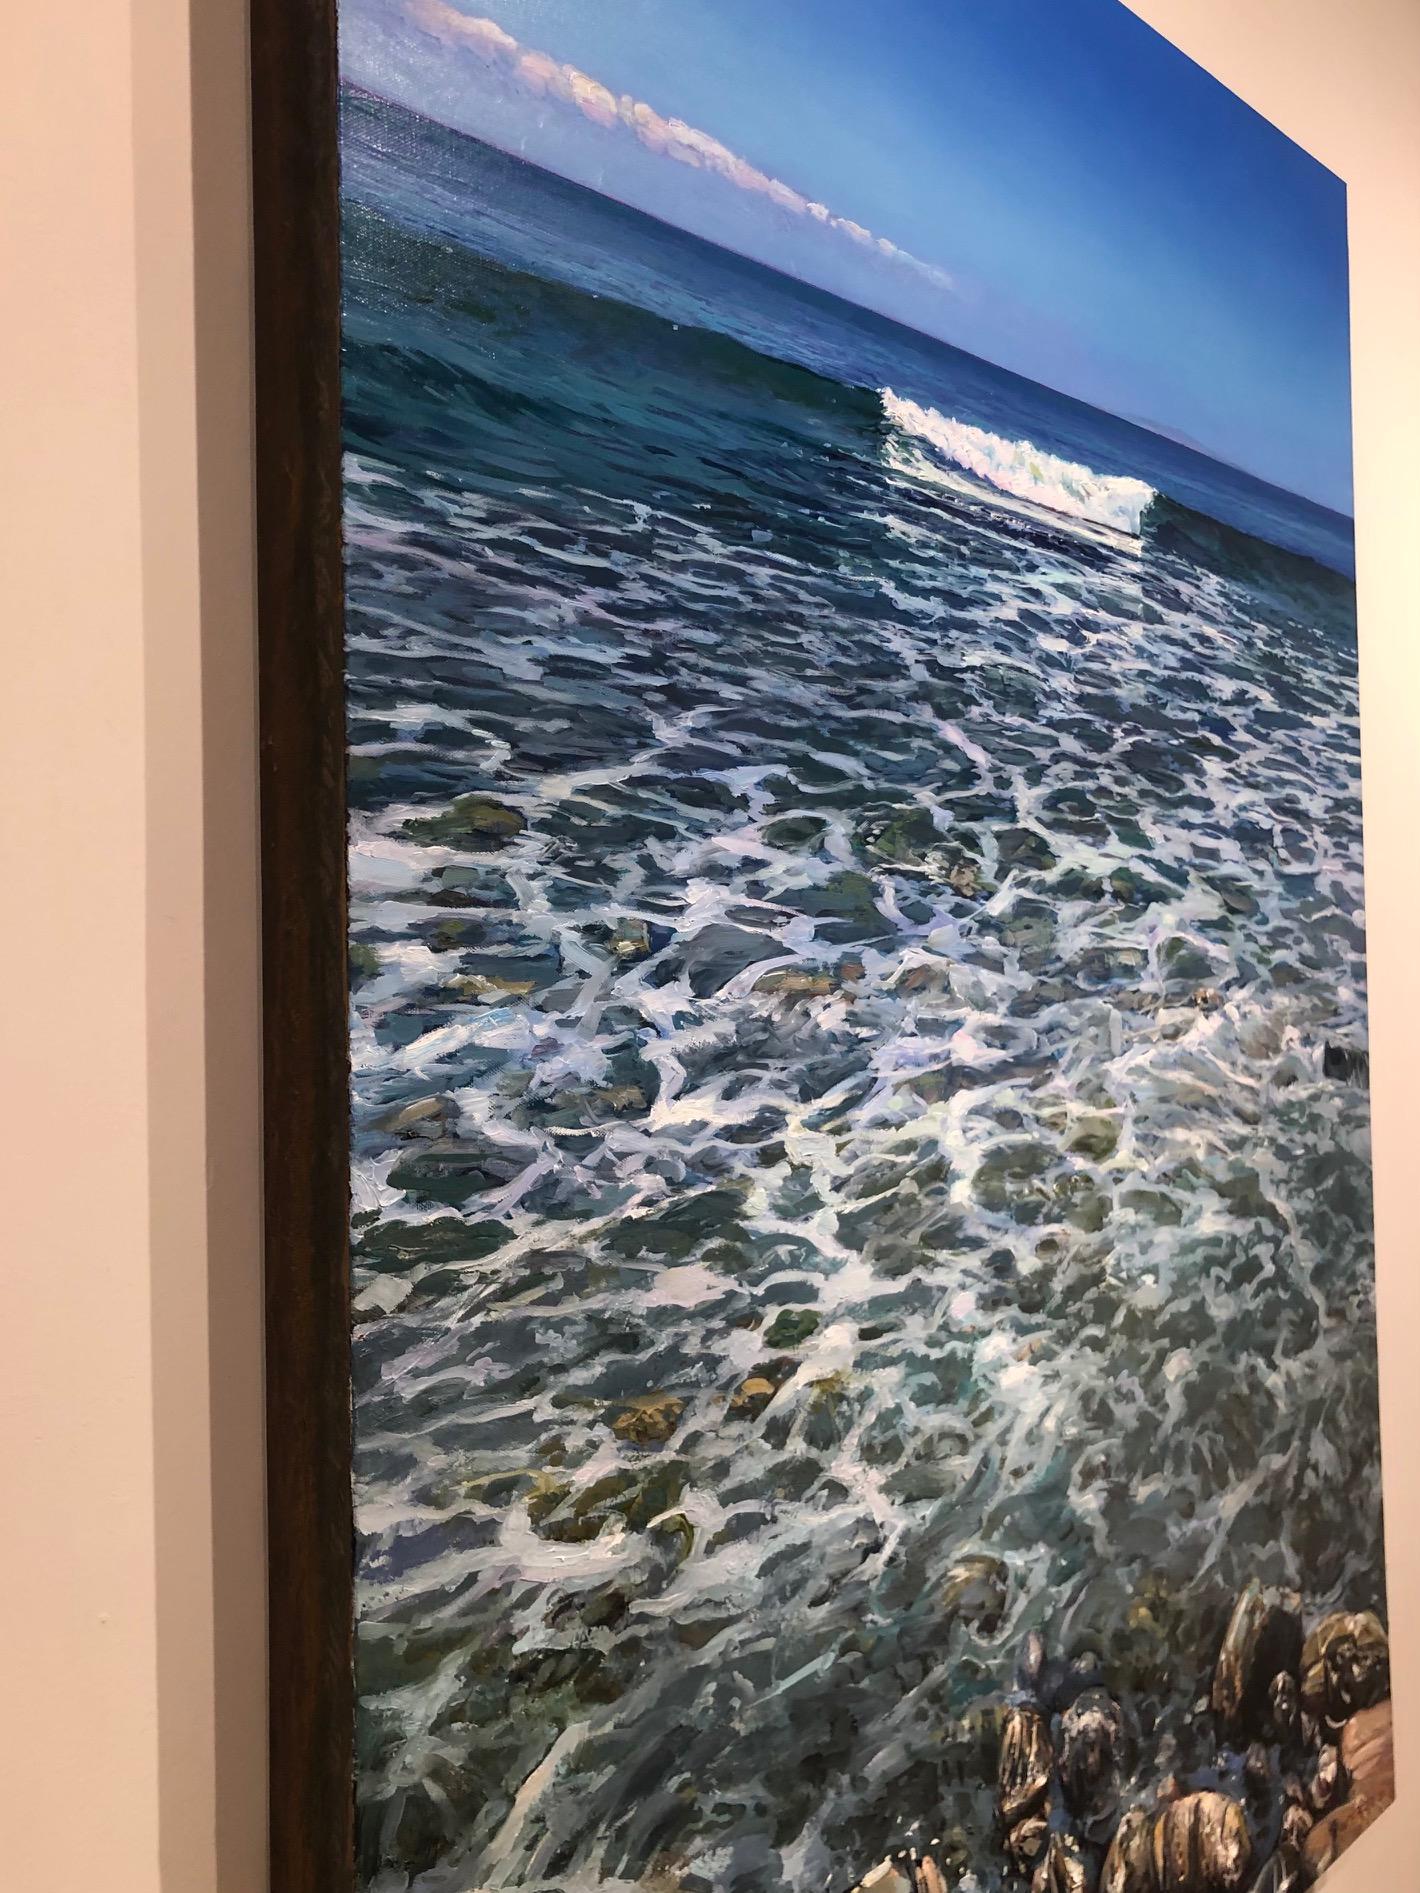 Breathtaking ocean scene / tide pool - at the edge of the sea. where the water rushes endlessly over sand with rocks in the foreground with a distant pink horizon. oil on canvas, 48 x 36 inches.  Ready to hang unframed with its edge painted in a